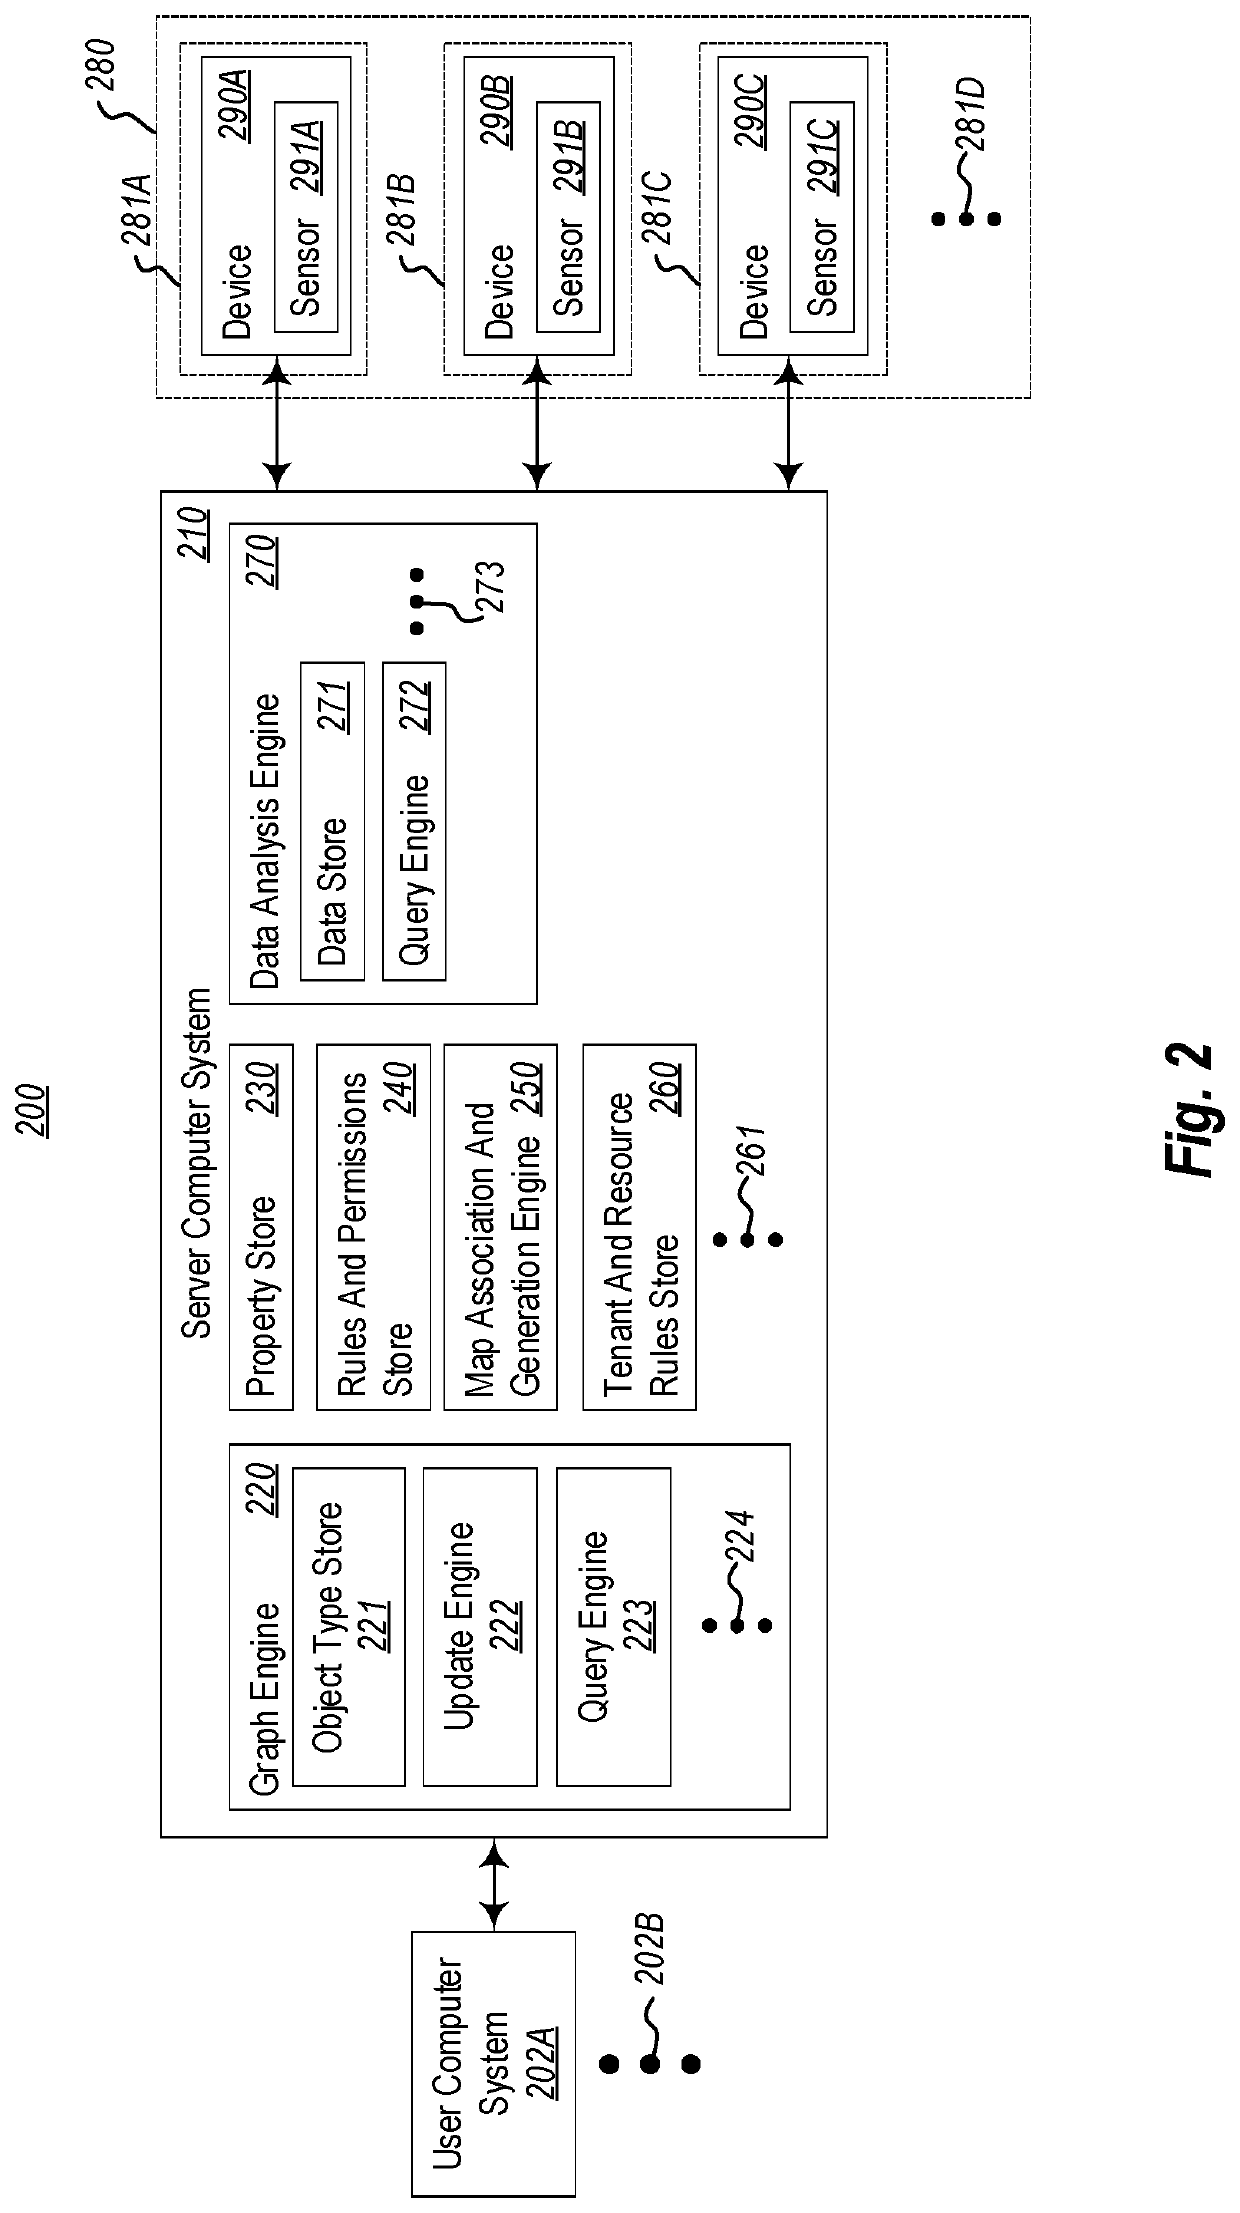 Methods and systems for executing business logic related to physical spaces and associated devices